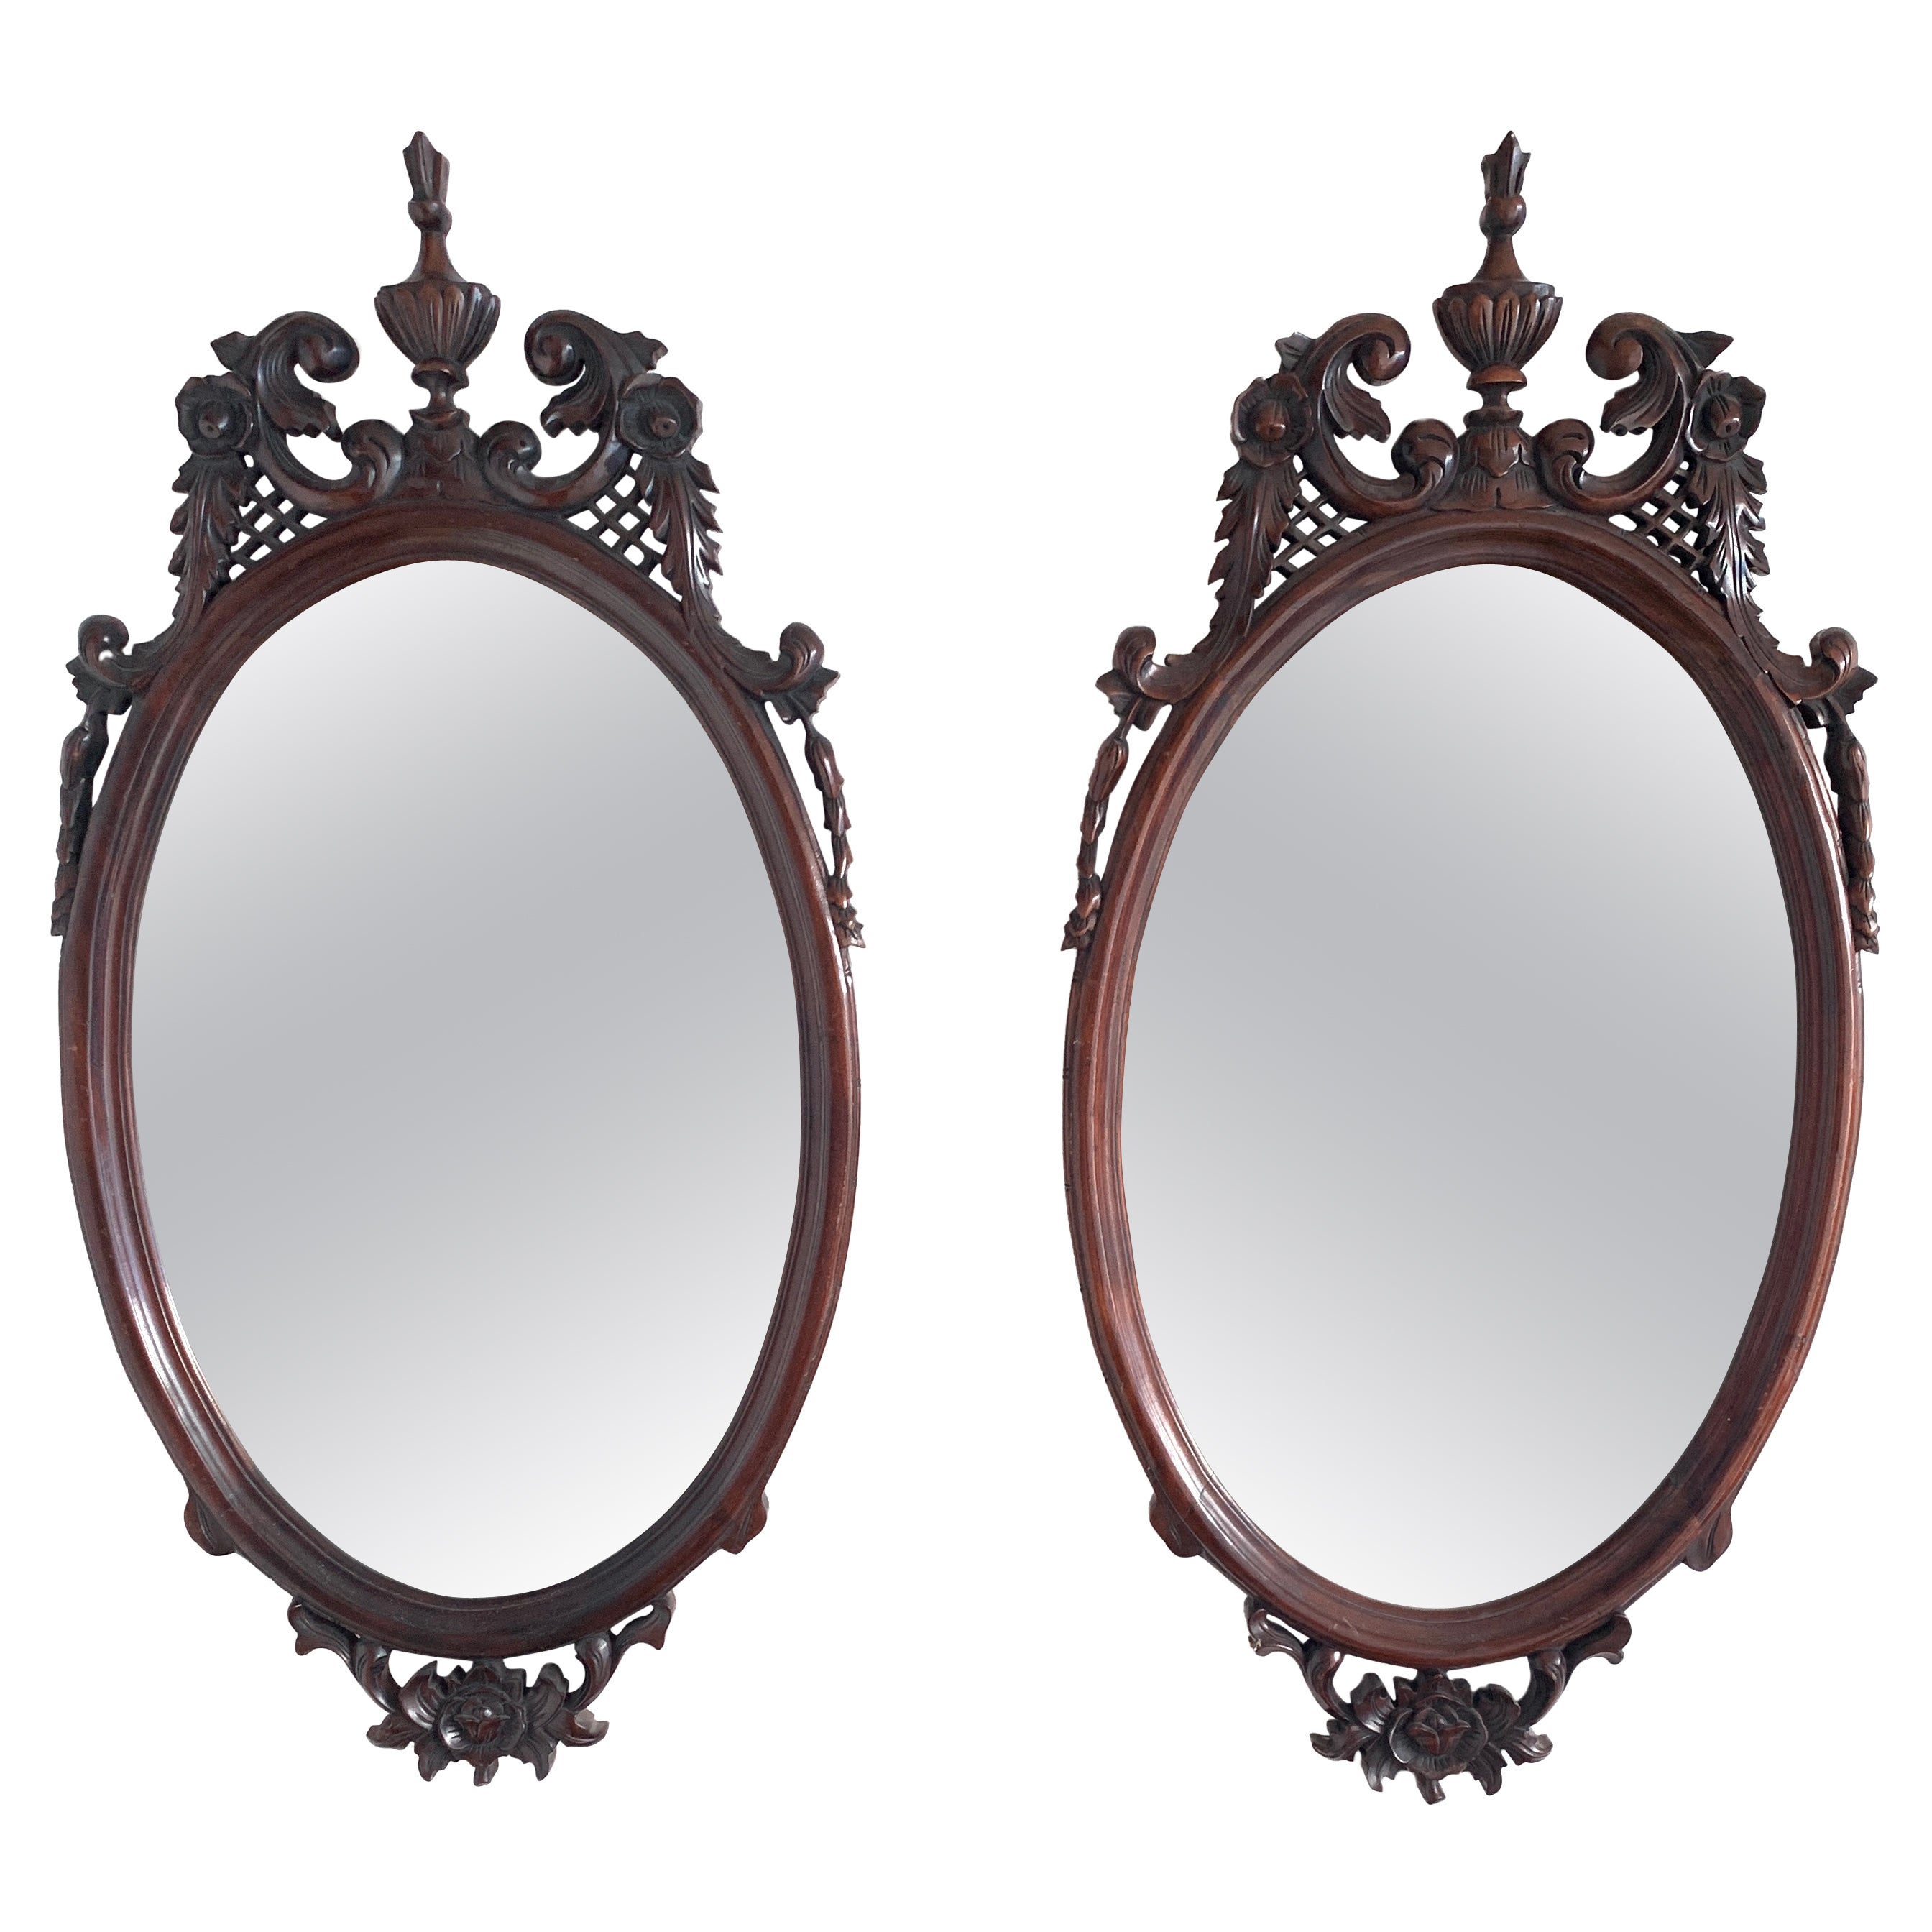 Pair of Antique Victorian Oval Mahogany Mirrors, 19th Century